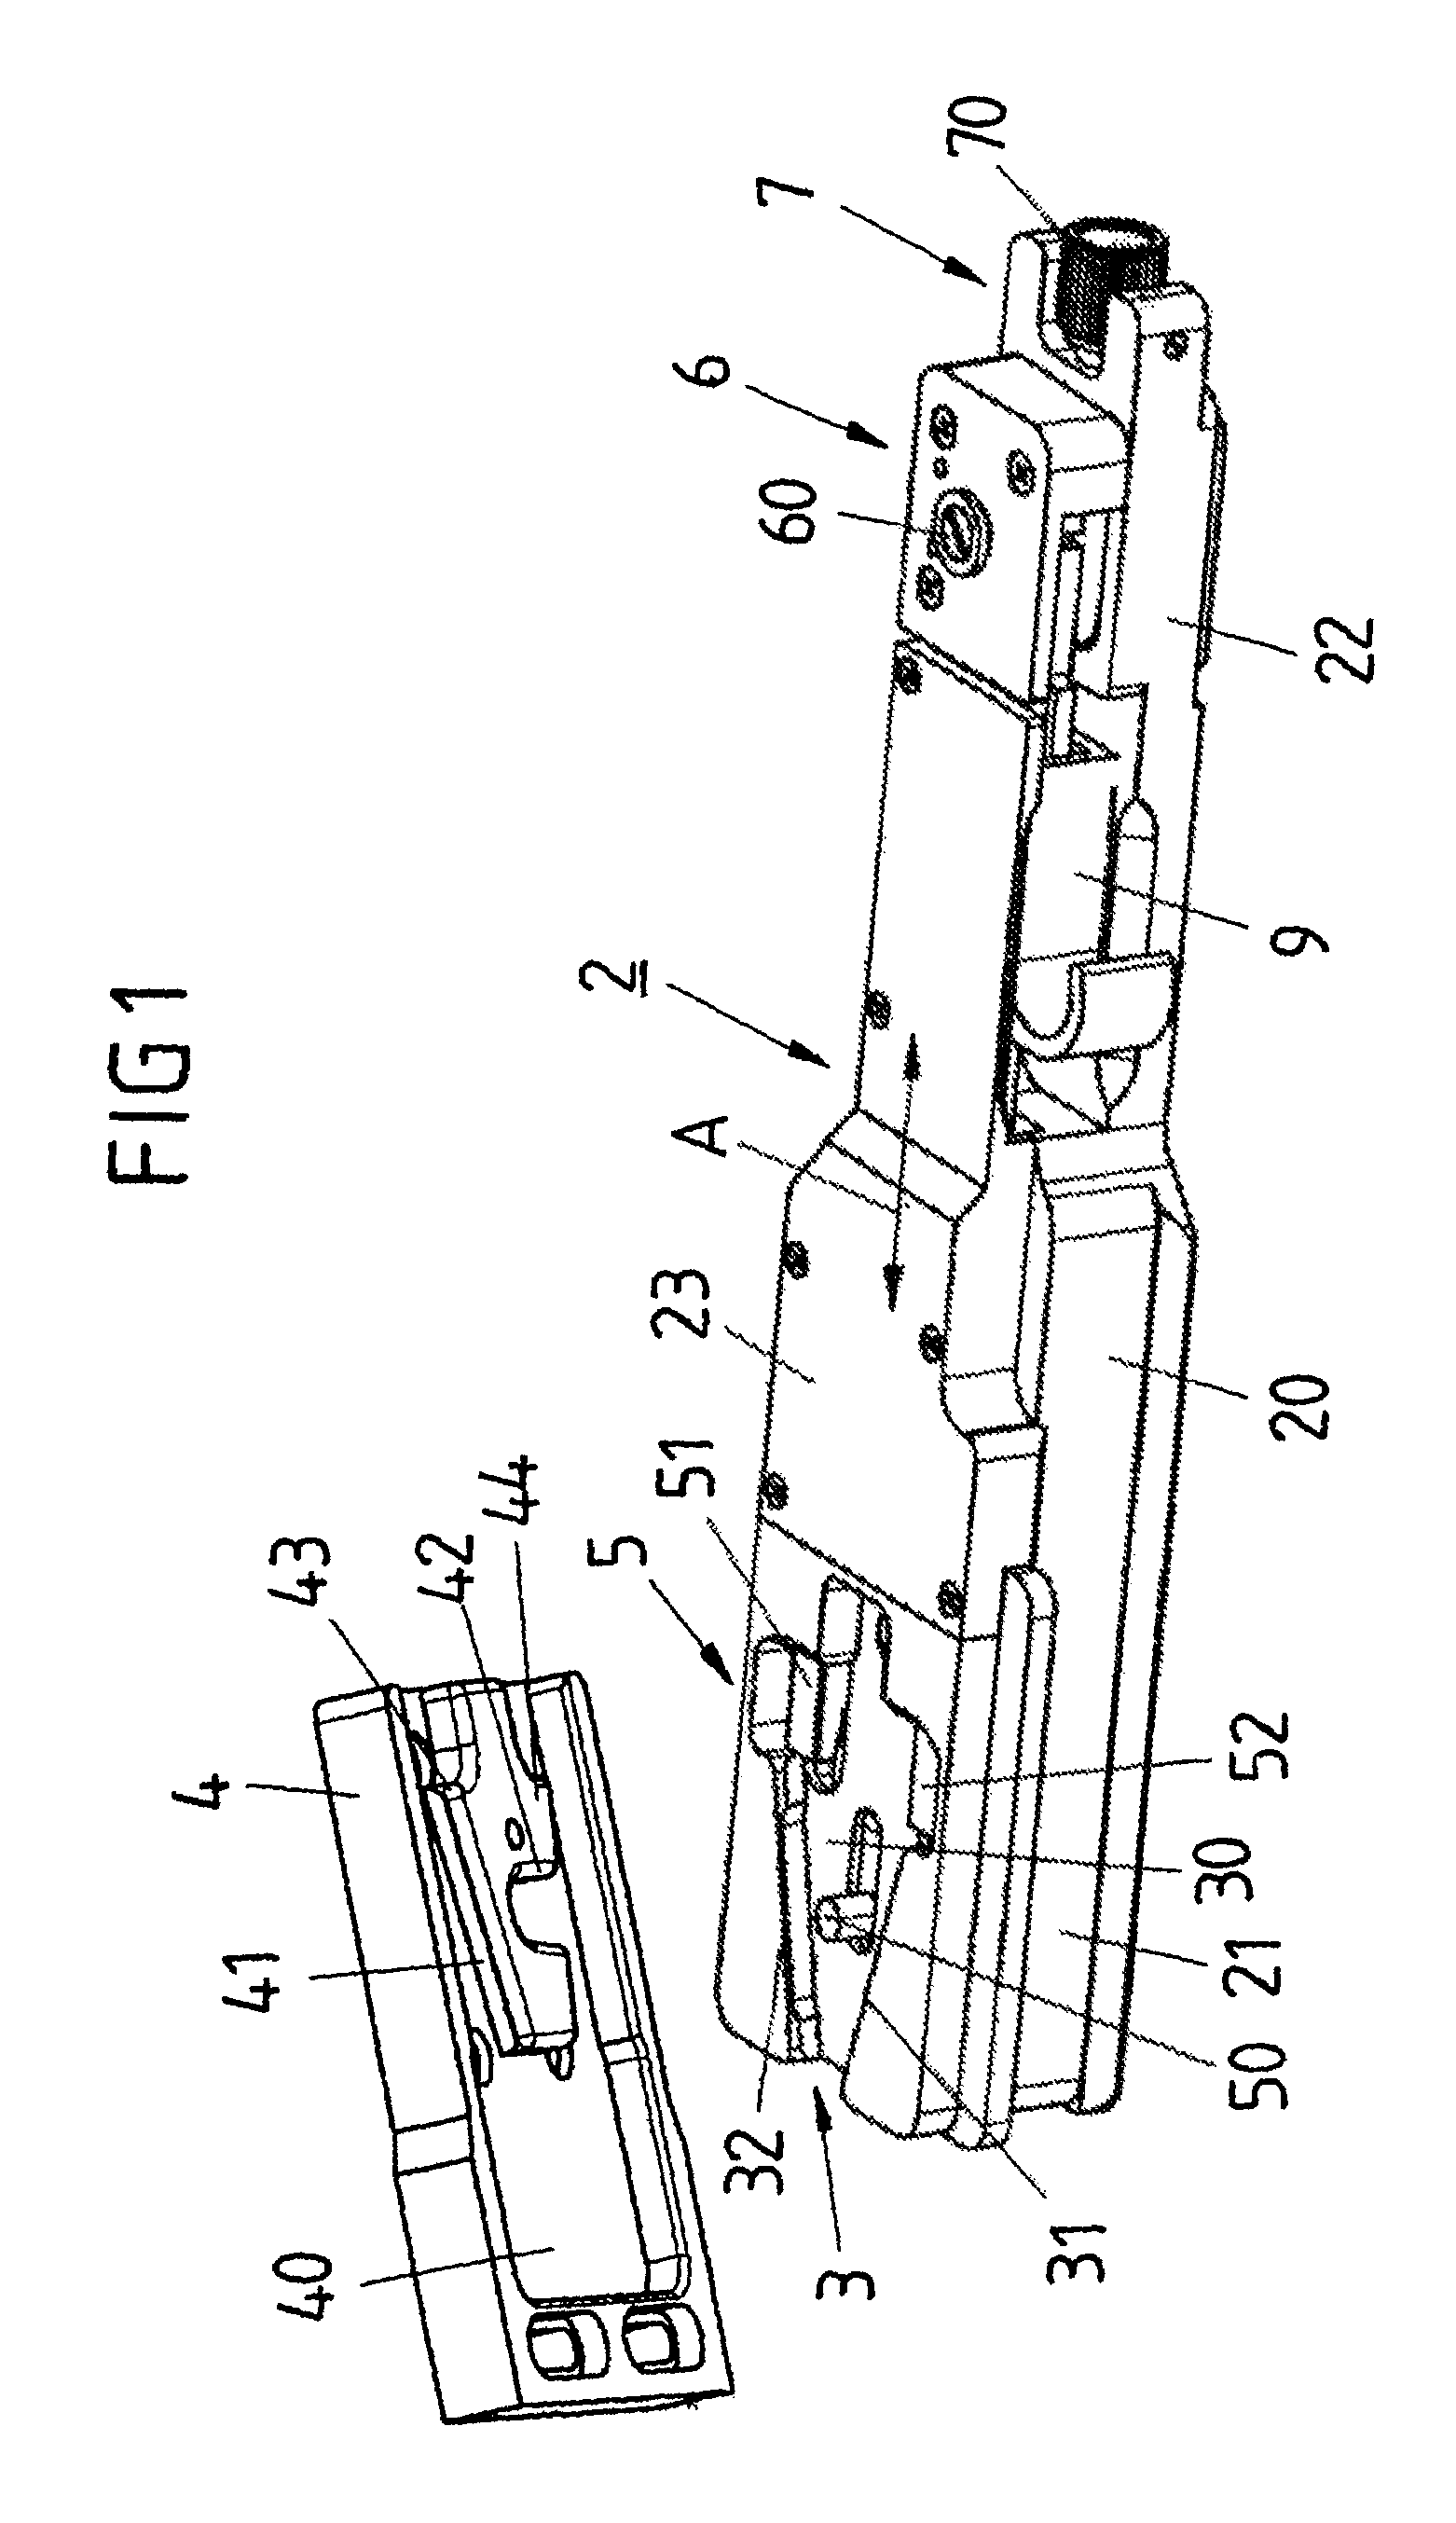 Device for connecting a camera to a supporting device